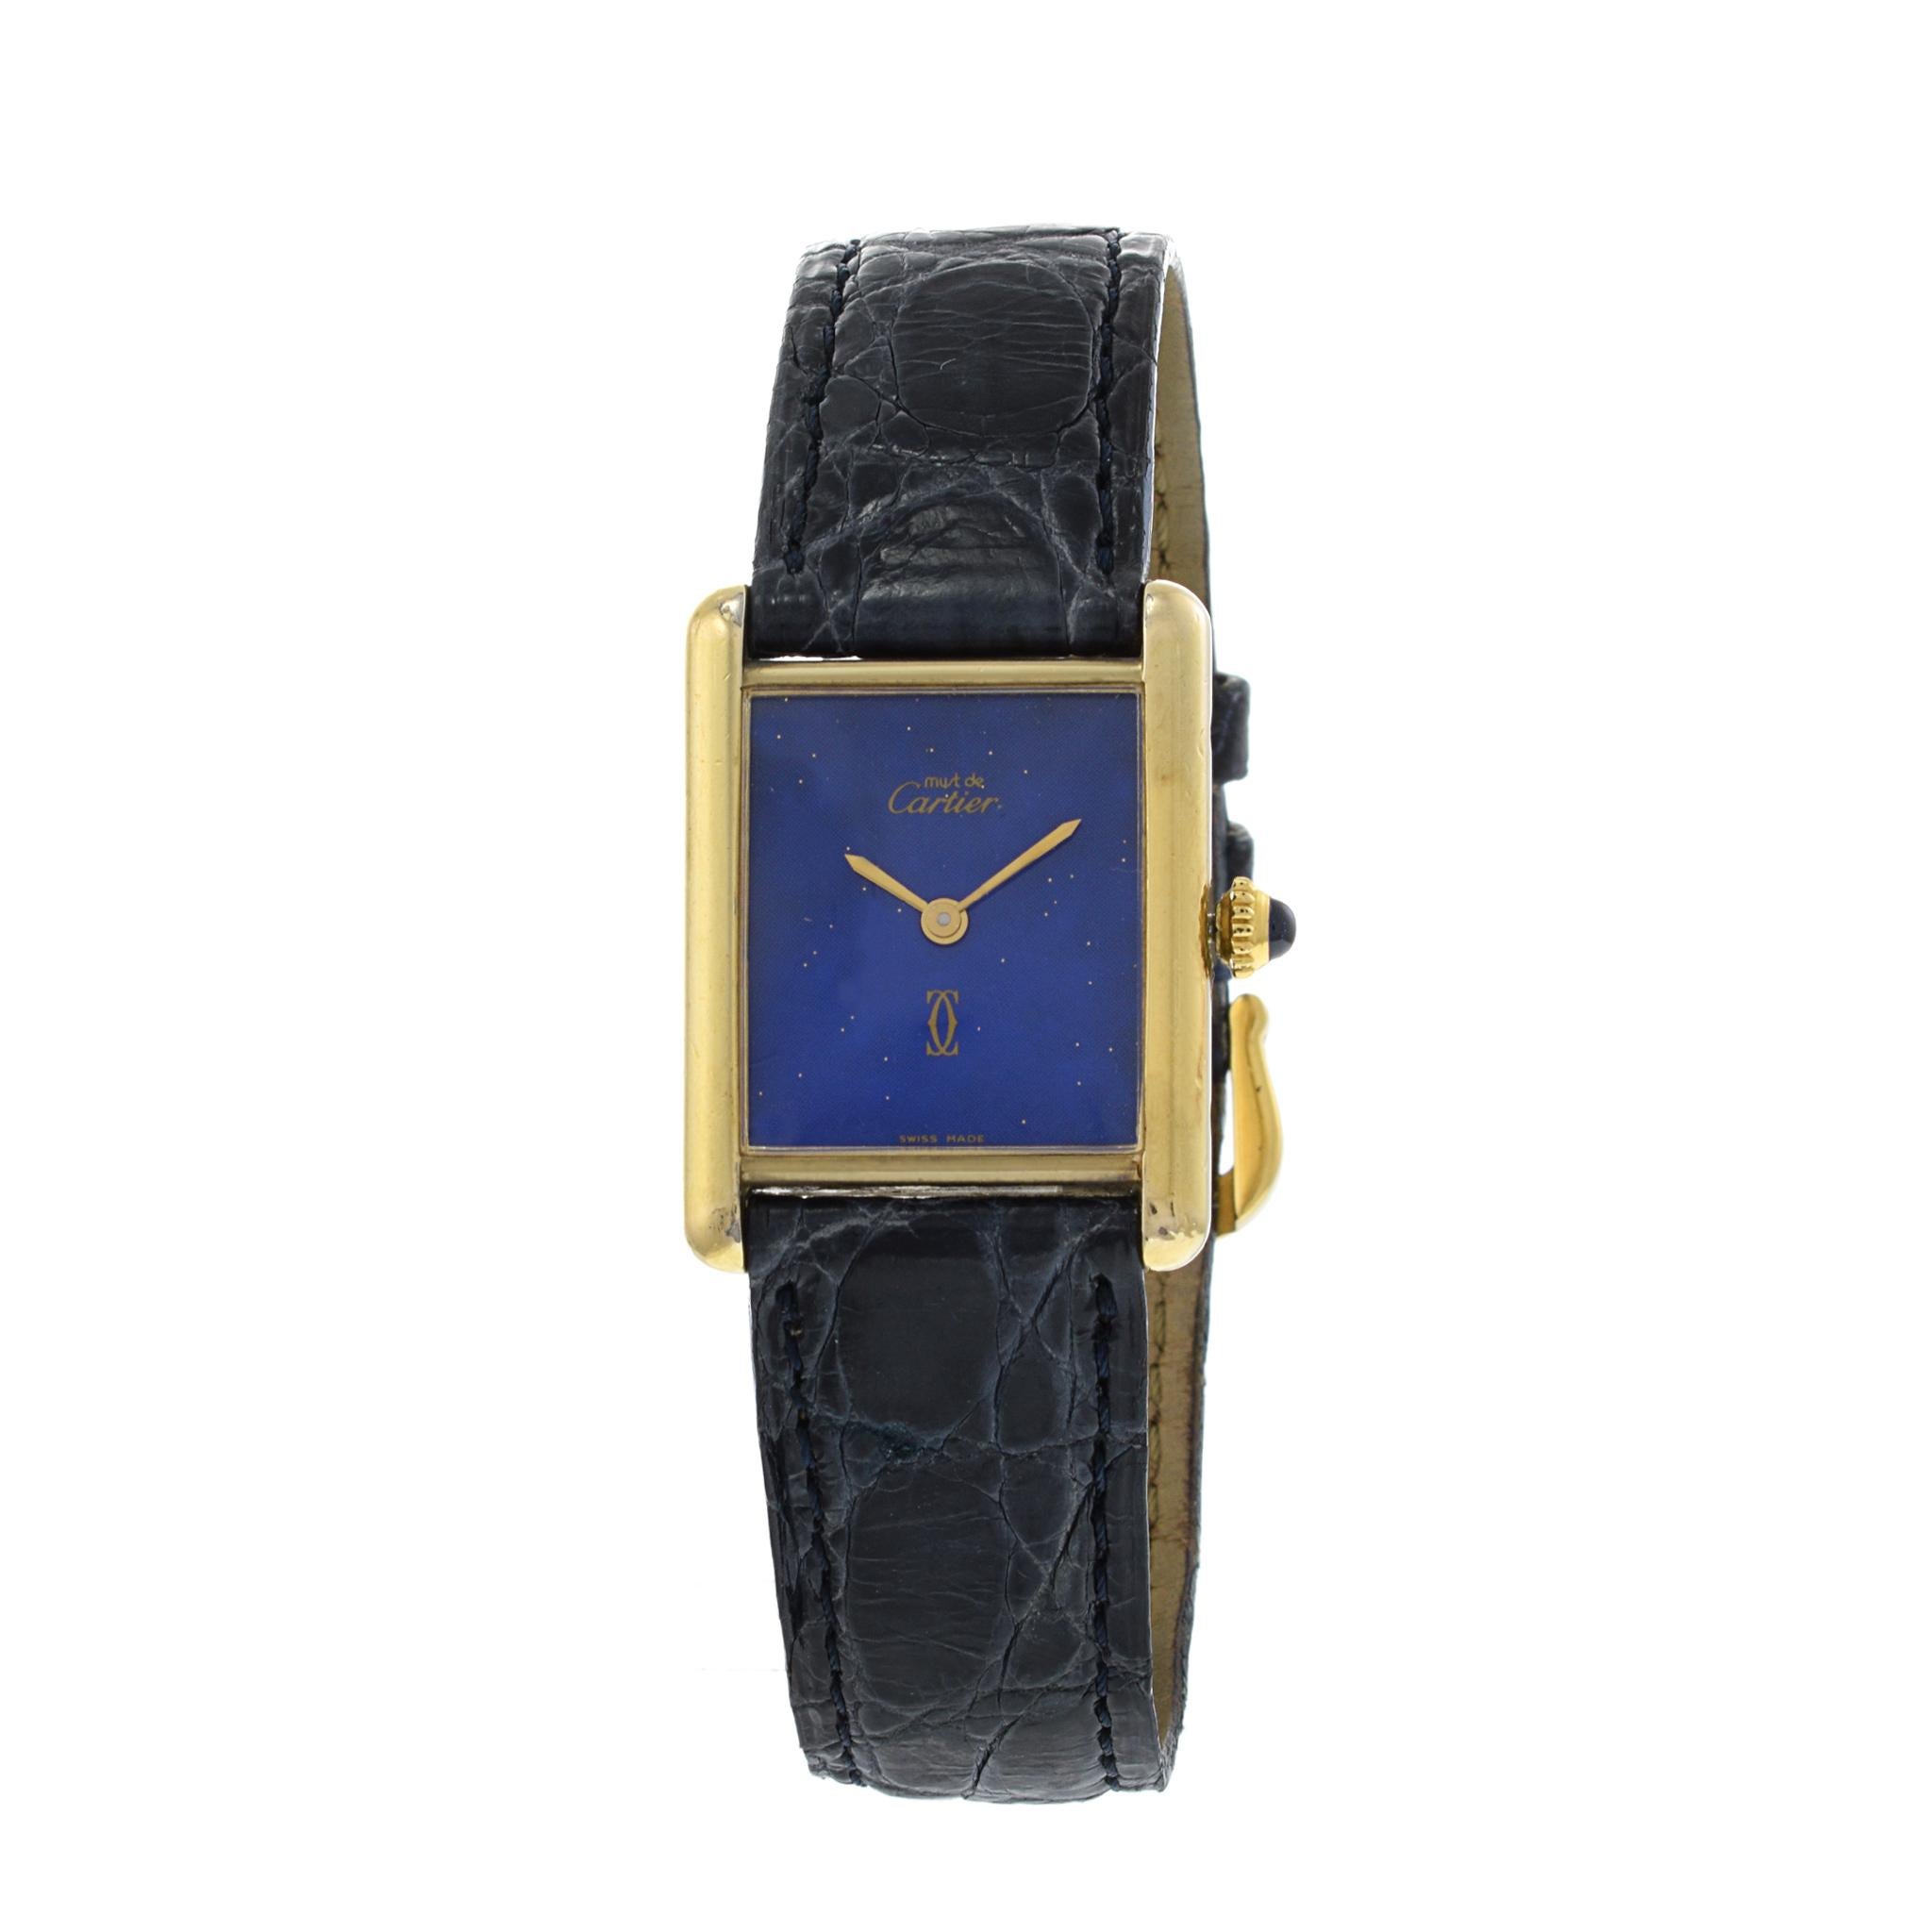 Introducing the Cartier Tank Vermeil Watch: Timeless Elegance.

Embrace refined luxury with the Cartier Tank Vermeil Watch. This iconic timepiece from the 1970s boasts a black dial, radiating timeless sophistication. The 23.5mm x 30.5mm dimensions